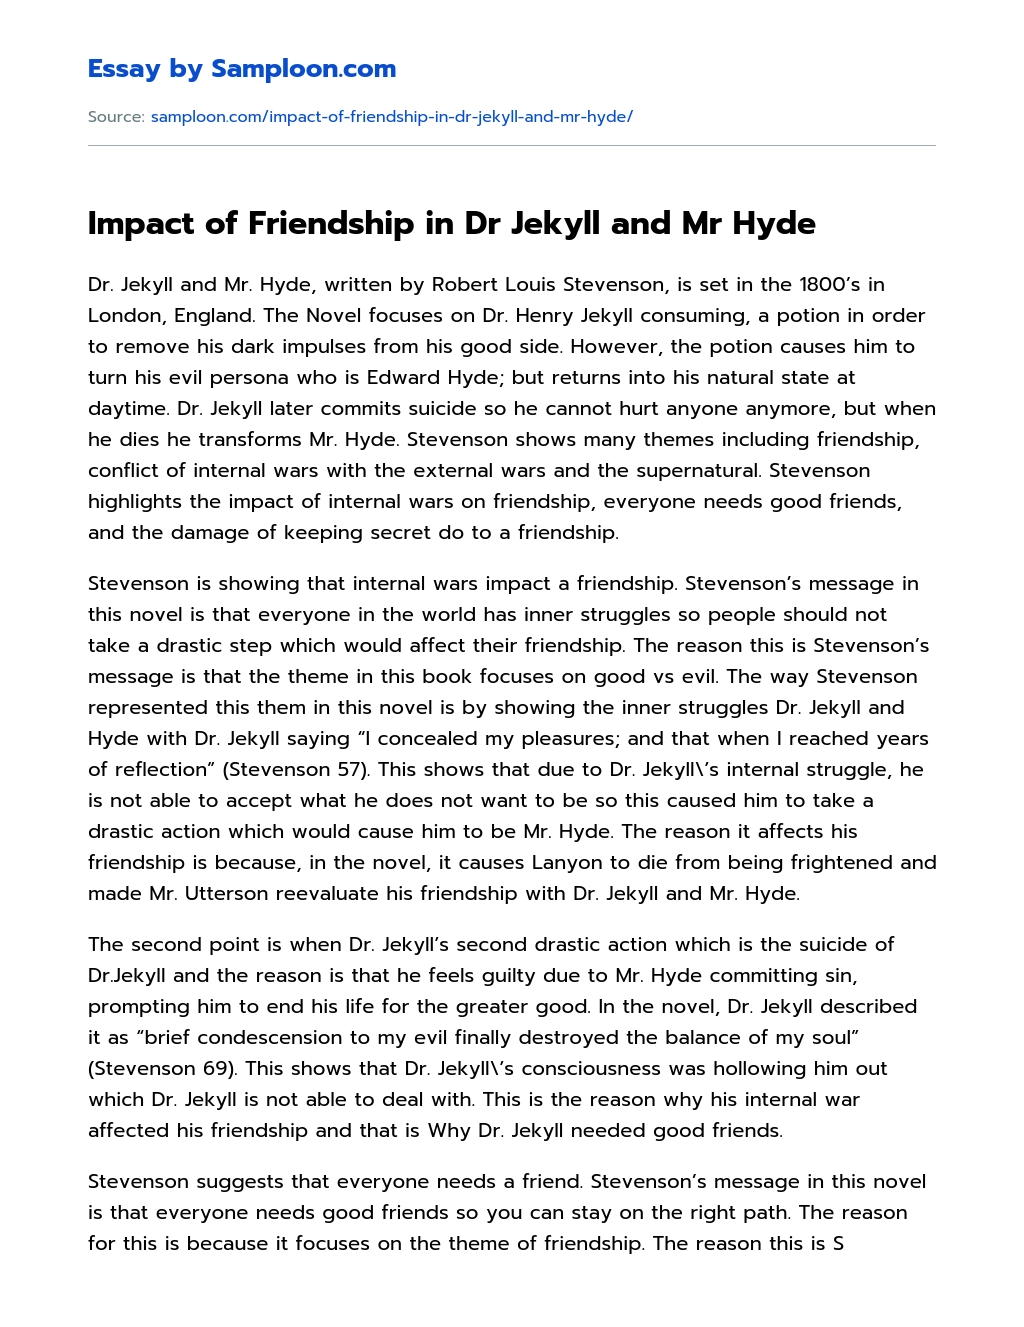 Impact of Friendship in Dr Jekyll and Mr Hyde Analytical Essay essay